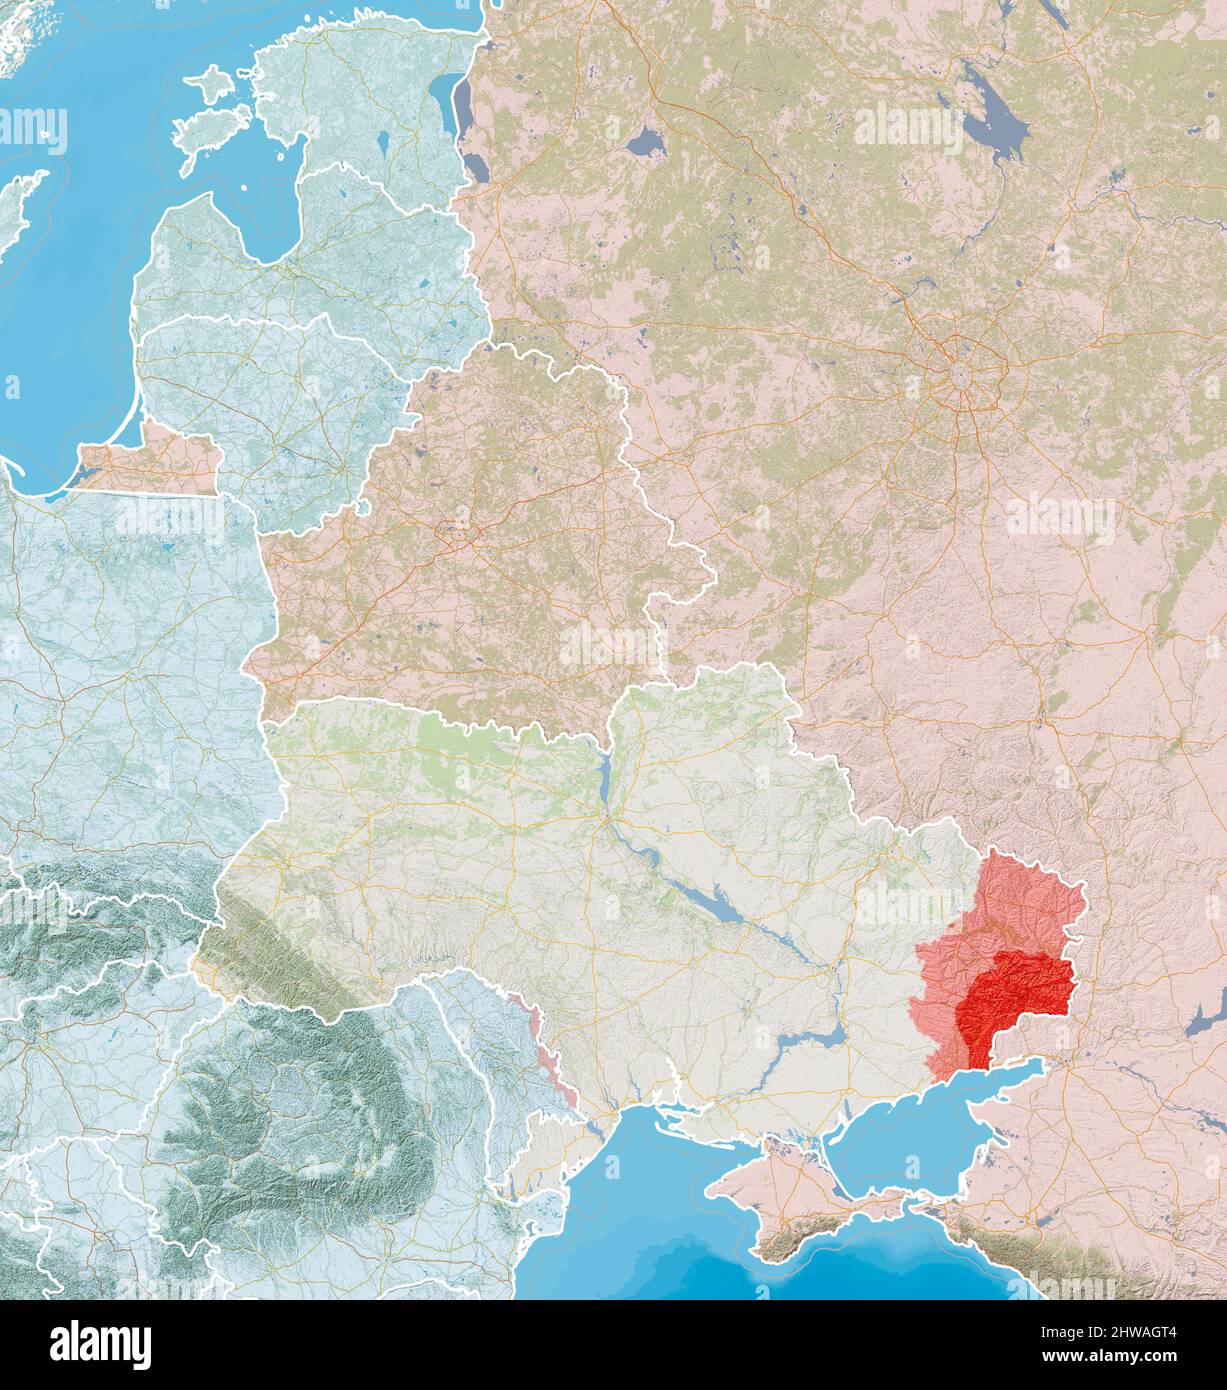 Advancement of Russian troops on Ukrainian soil. Map of the war situation in Ukraine. Position of Russian troops. 3d rendering Stock Photo